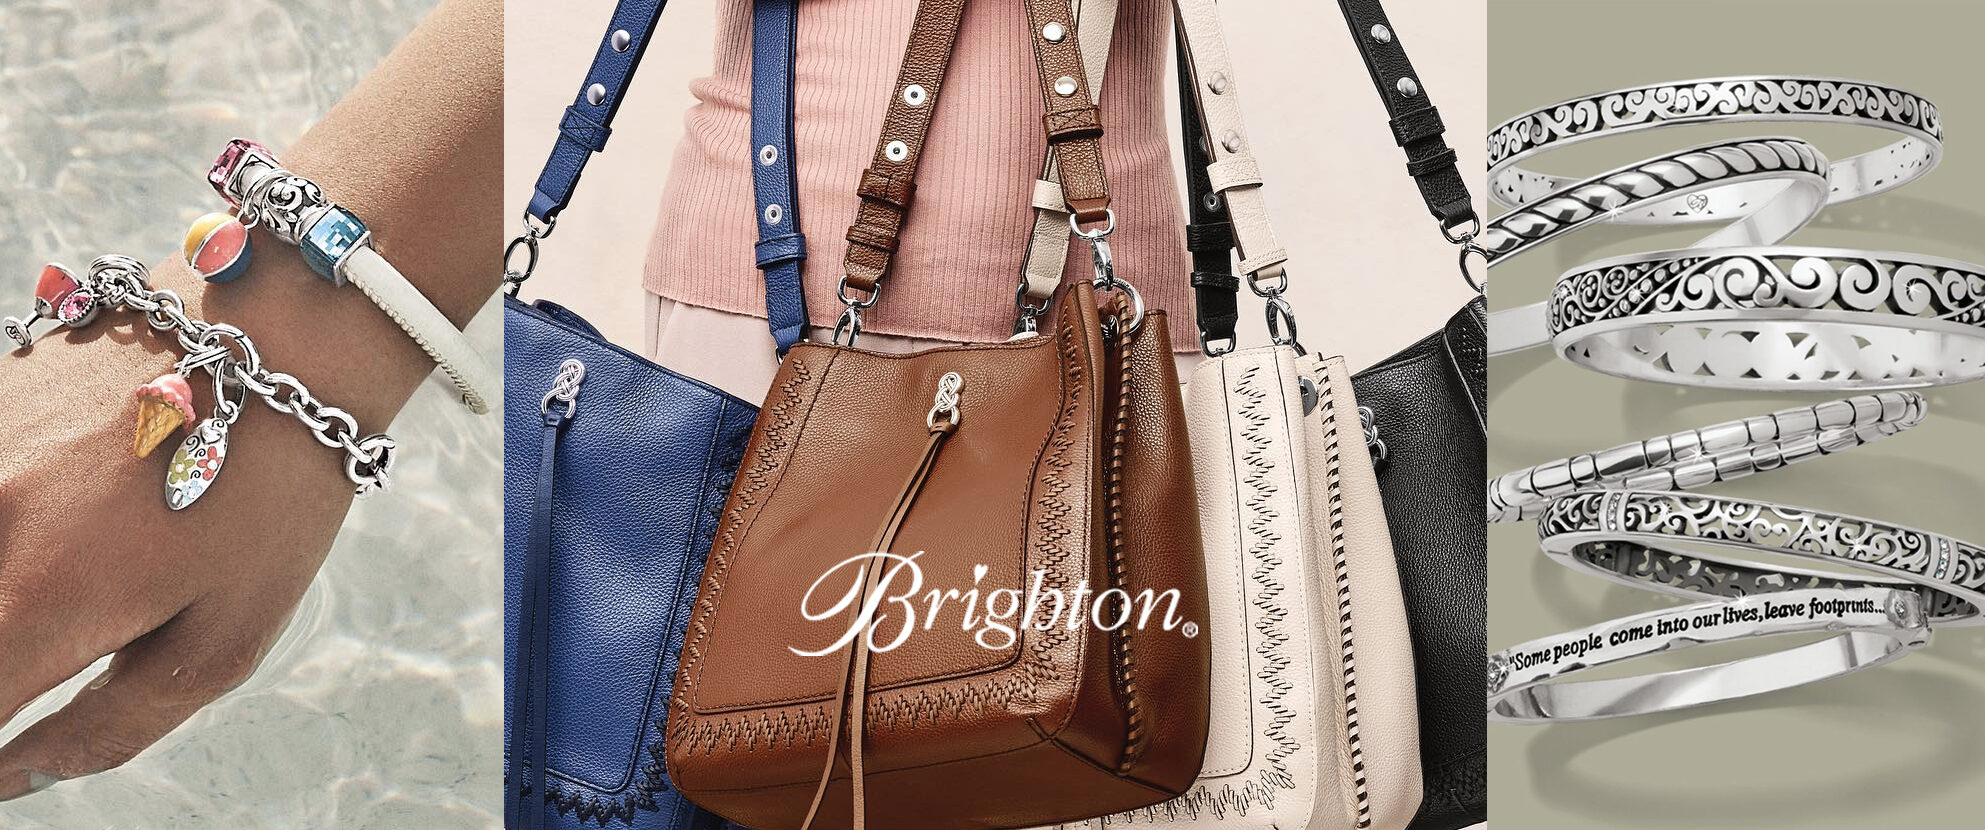 Dean's Clothing Featured Brand - Brighton women accessories collection.